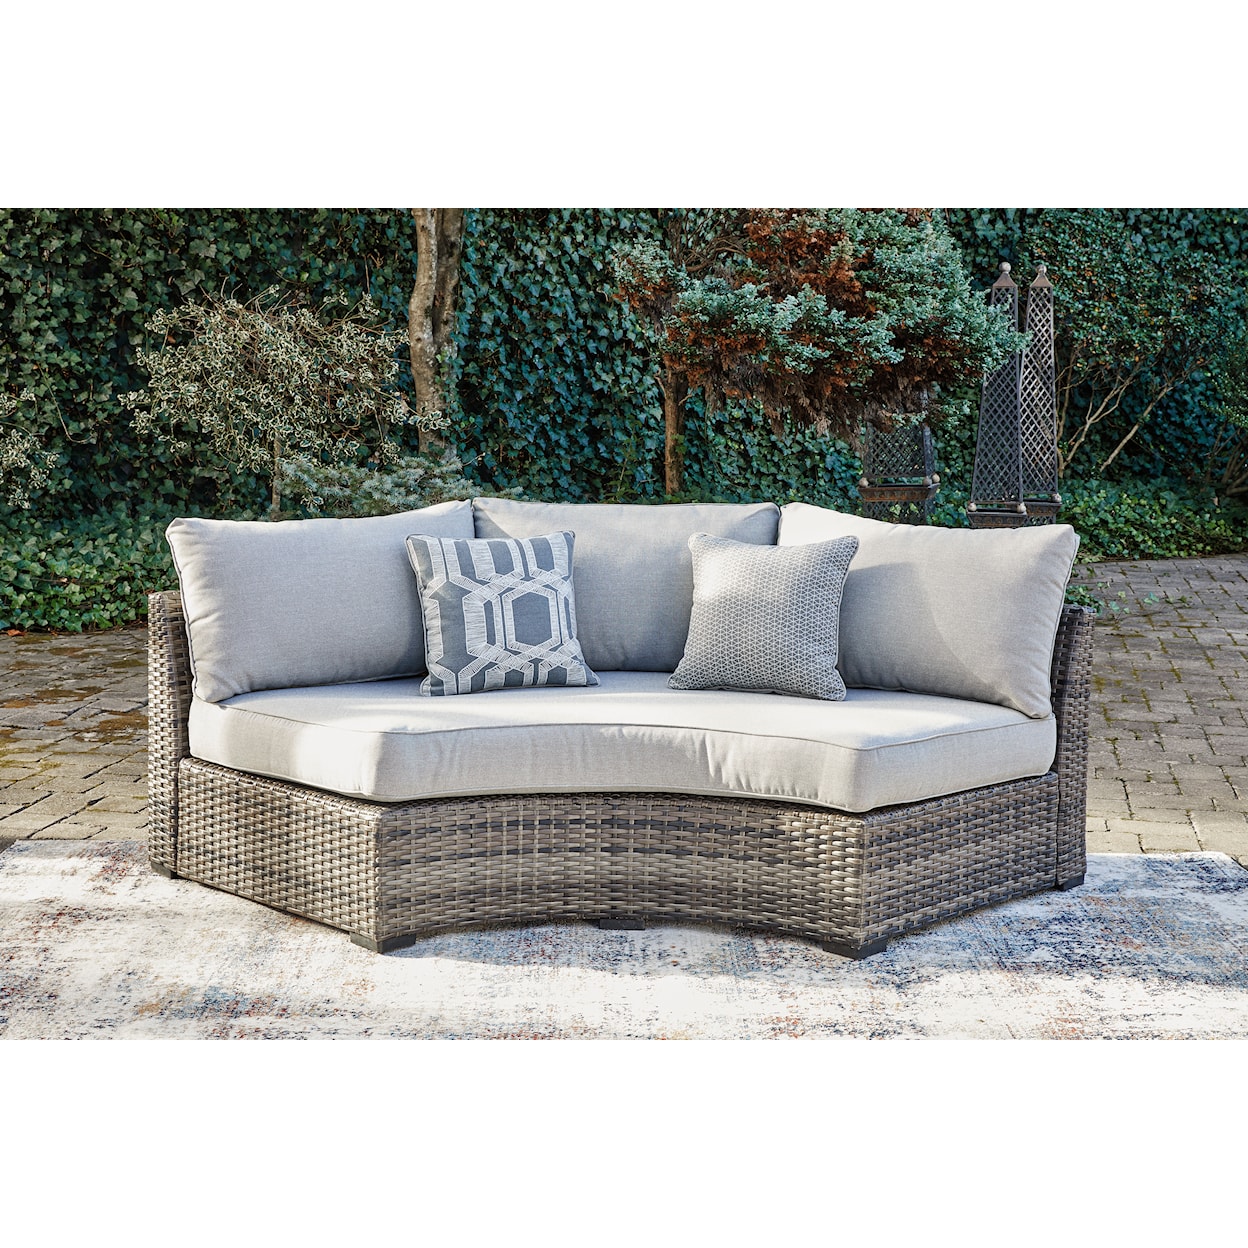 Ashley Signature Design Harbor Court Curved Loveseat with Cushion